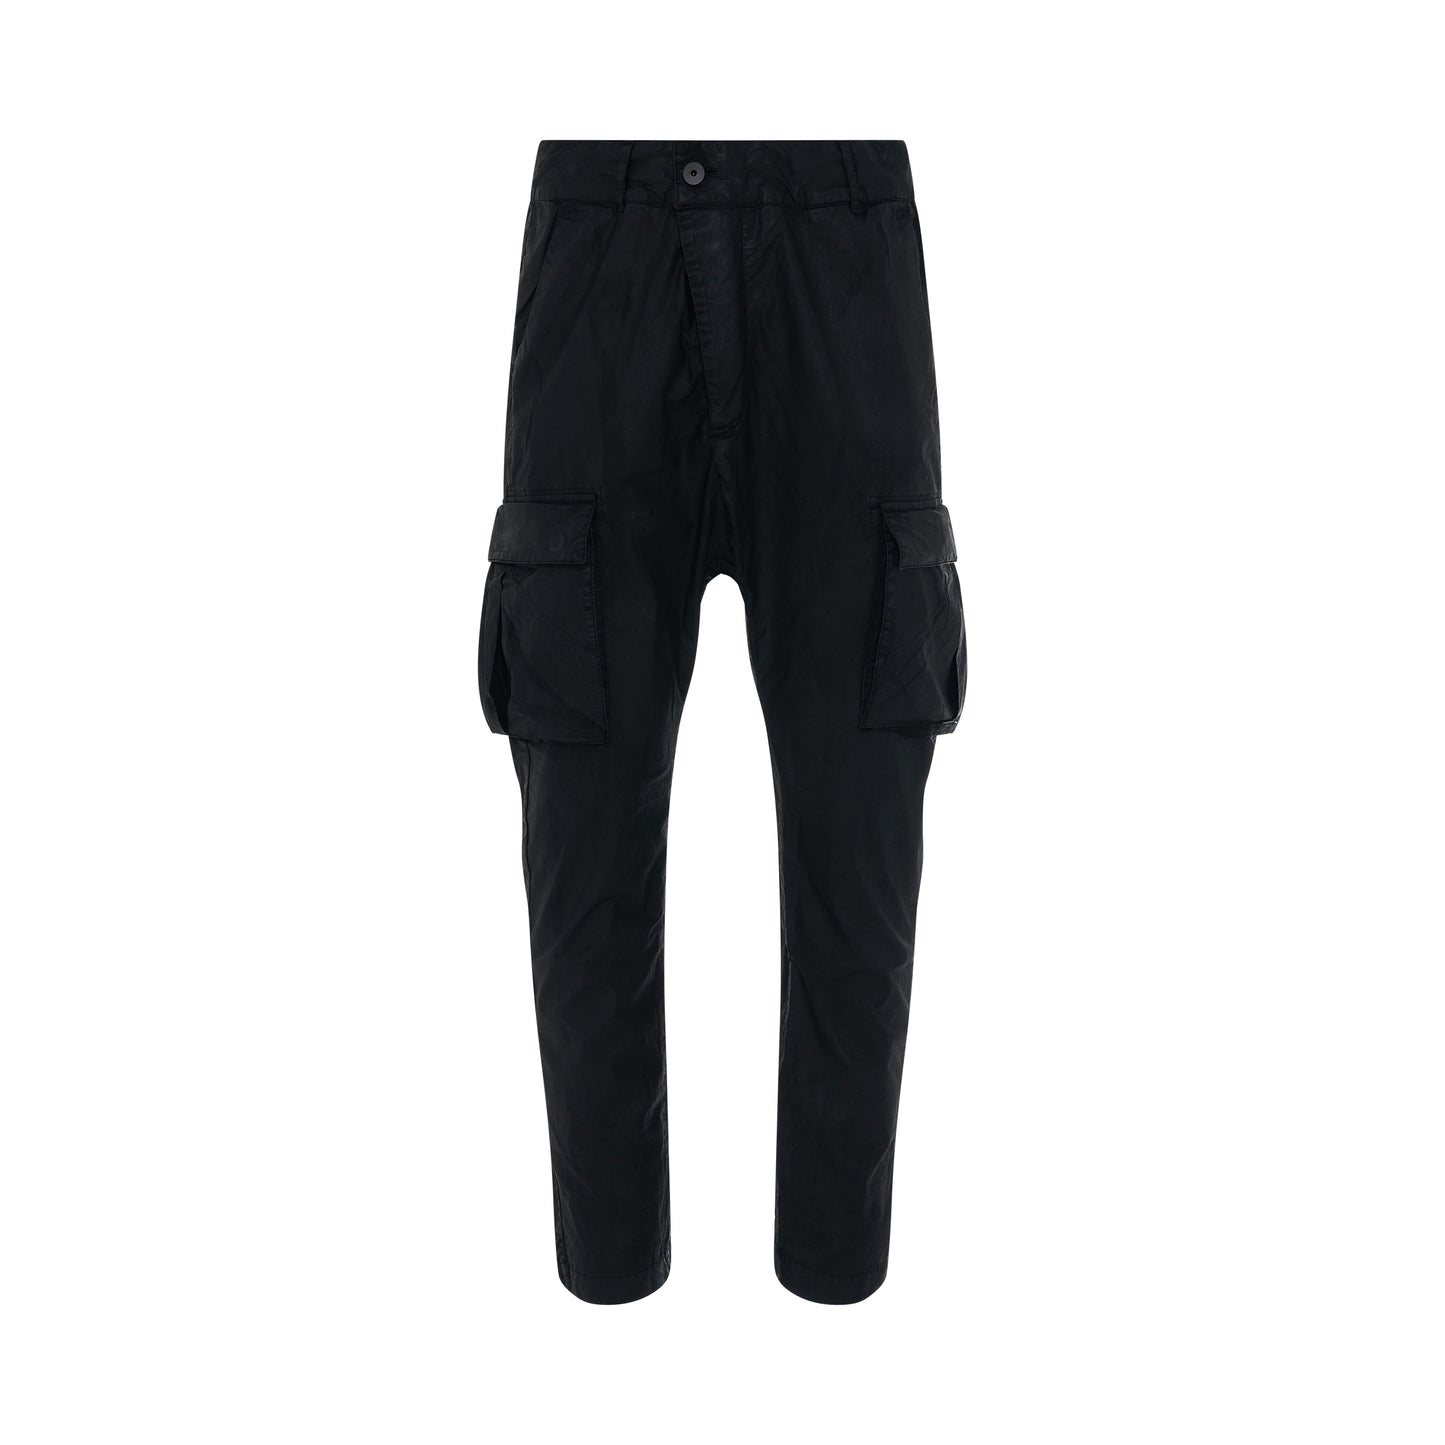 11 by BBS Side Pocket Casual Pant in Black